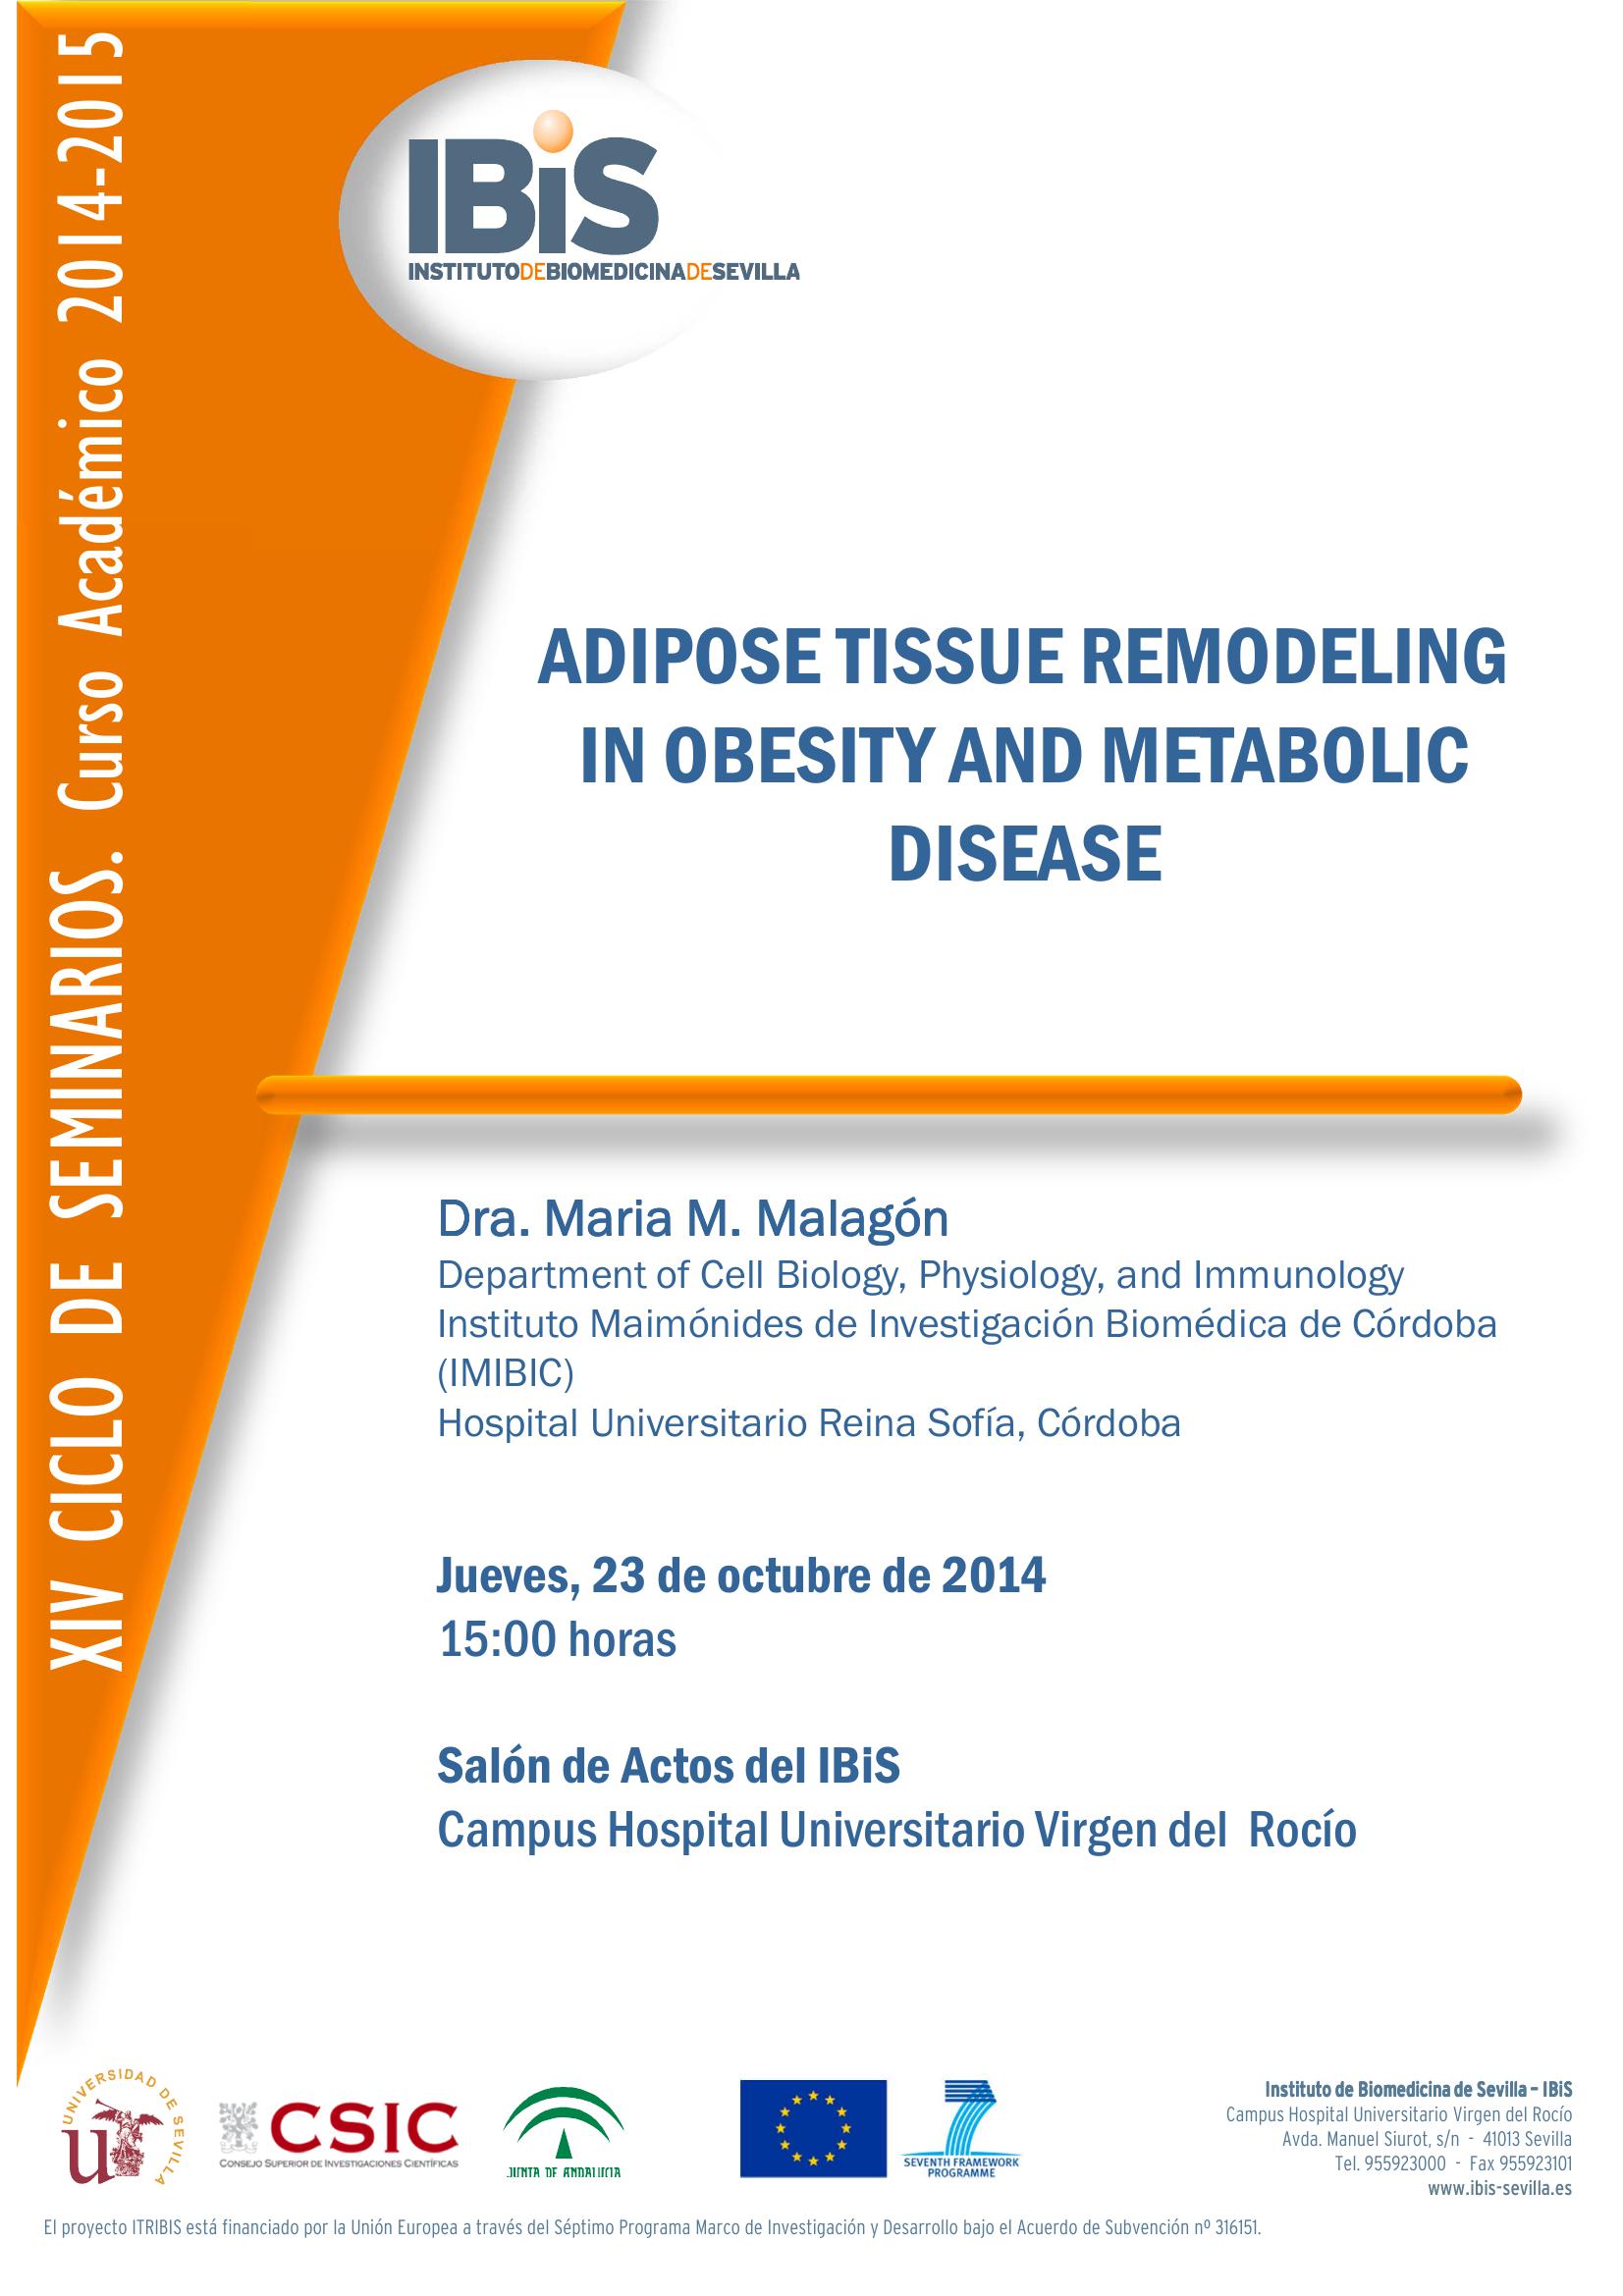 Poster: ADIPOSE TISSUE REMODELING IN OBESITY AND METABOLIC DISEASE